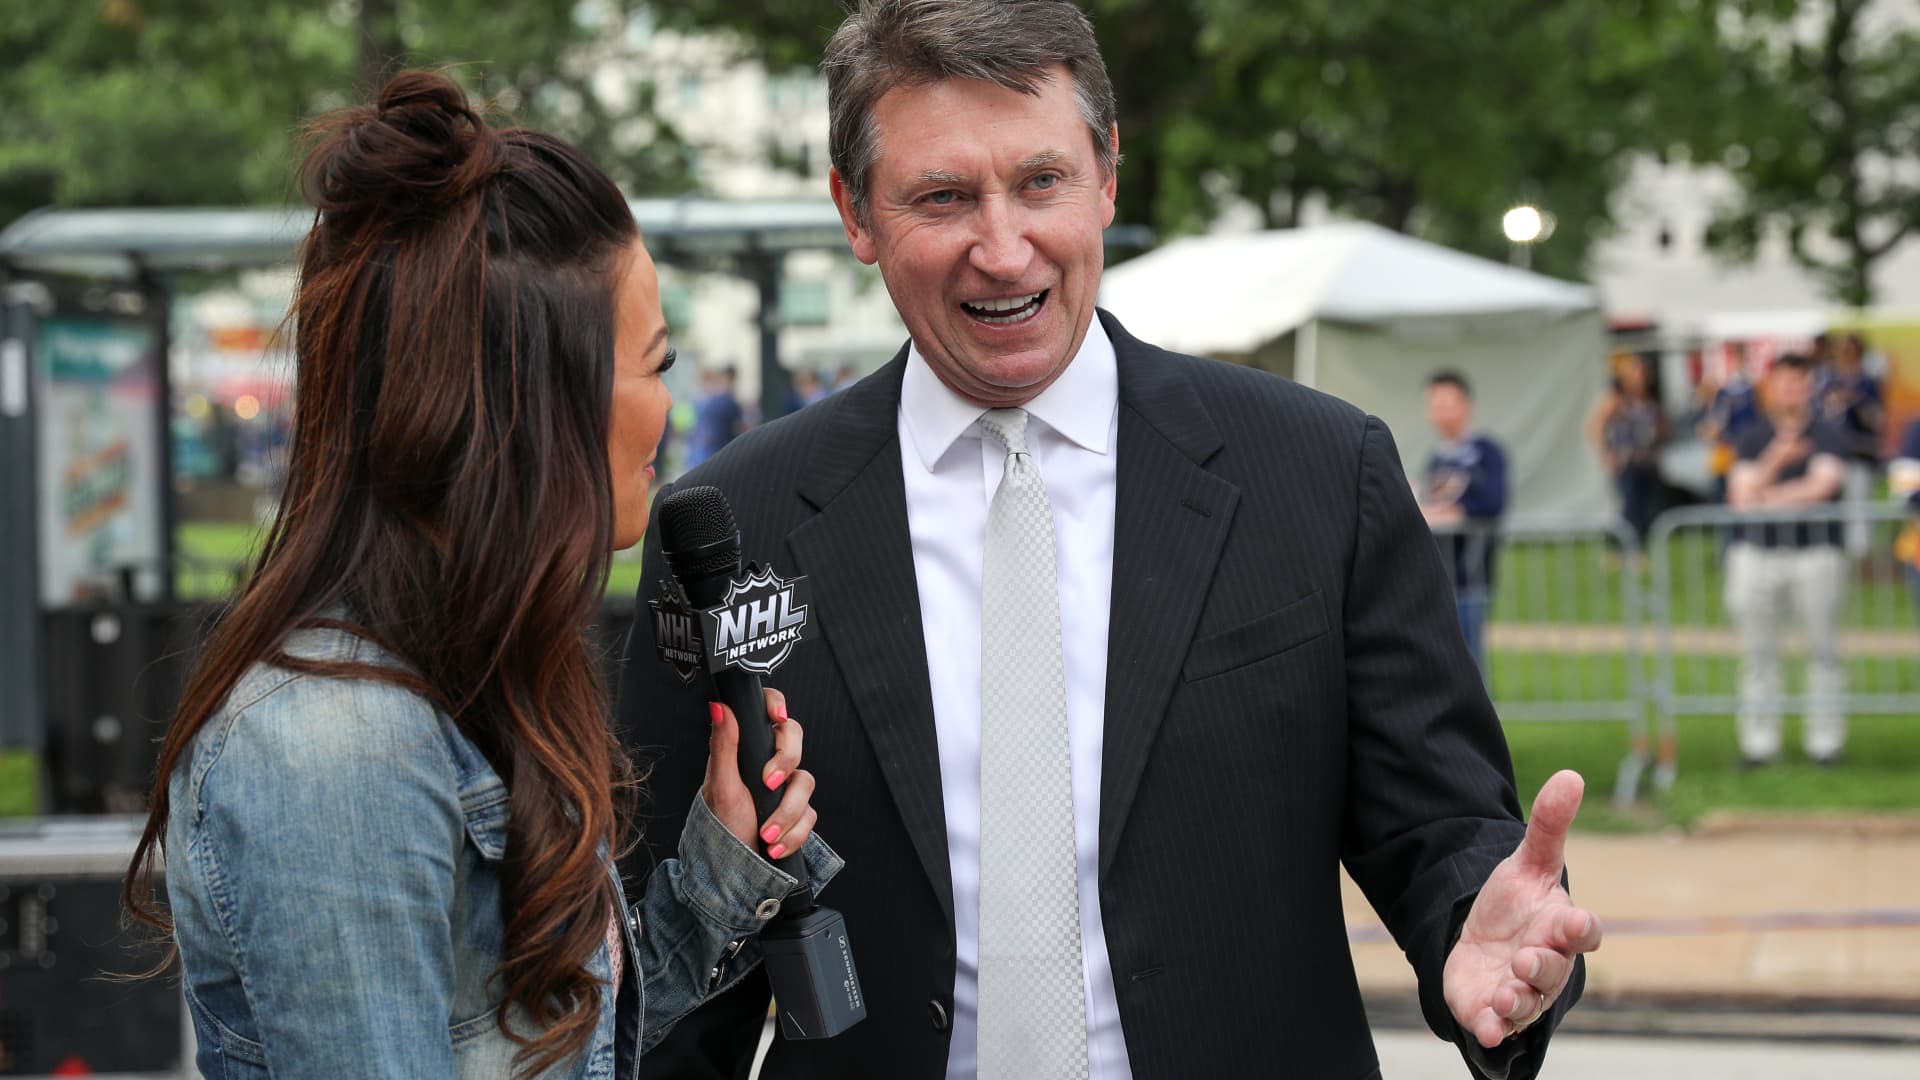 Jamie Redmond interviews Wayne Gretzky before Game Four of the 2019 NHL Stanley Cup Final between the Boston Bruins and the St. Louis Blues at Enterprise Center on June 03, 2019 in St Louis, Missouri.